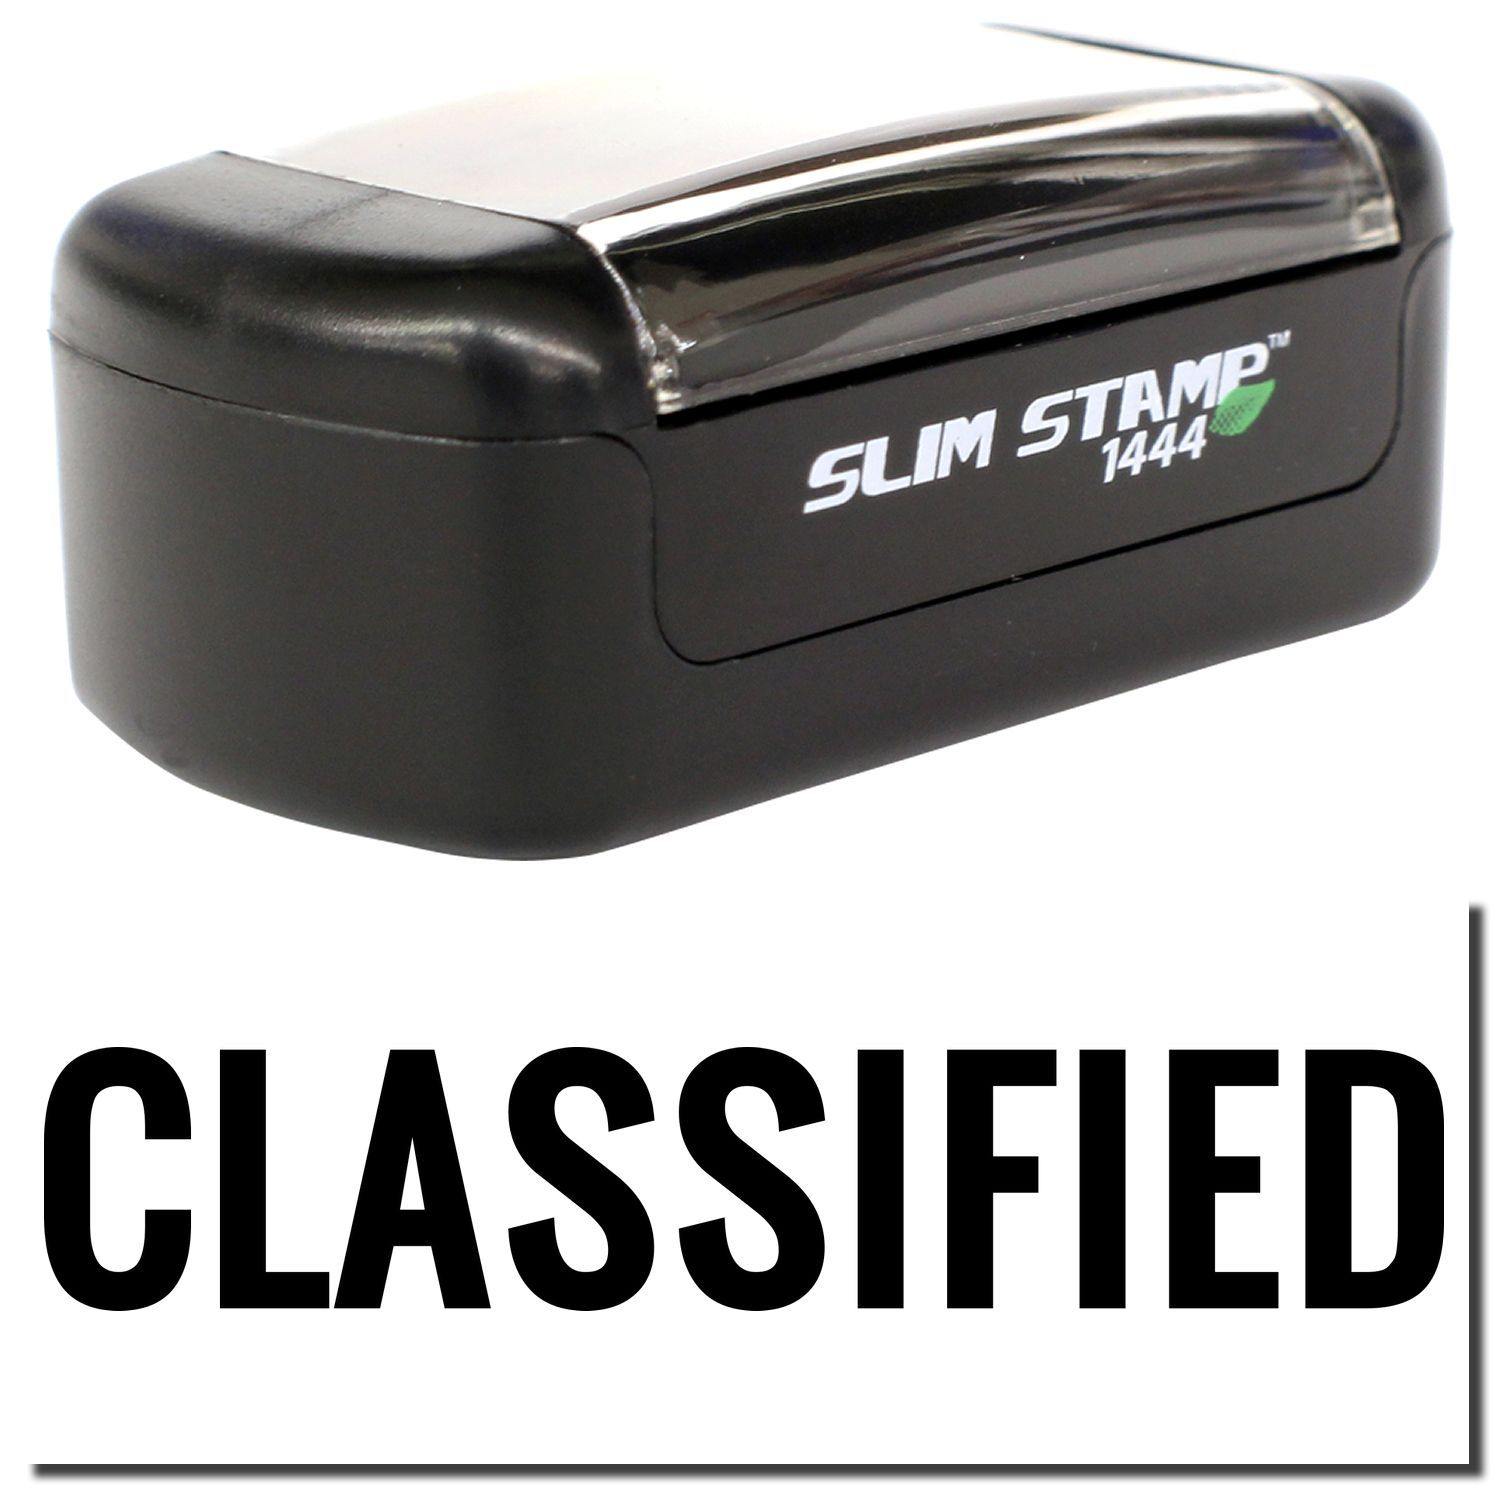 A stock office pre-inked stamp with a stamped image showing how the text "CLASSIFIED" is displayed after stamping.